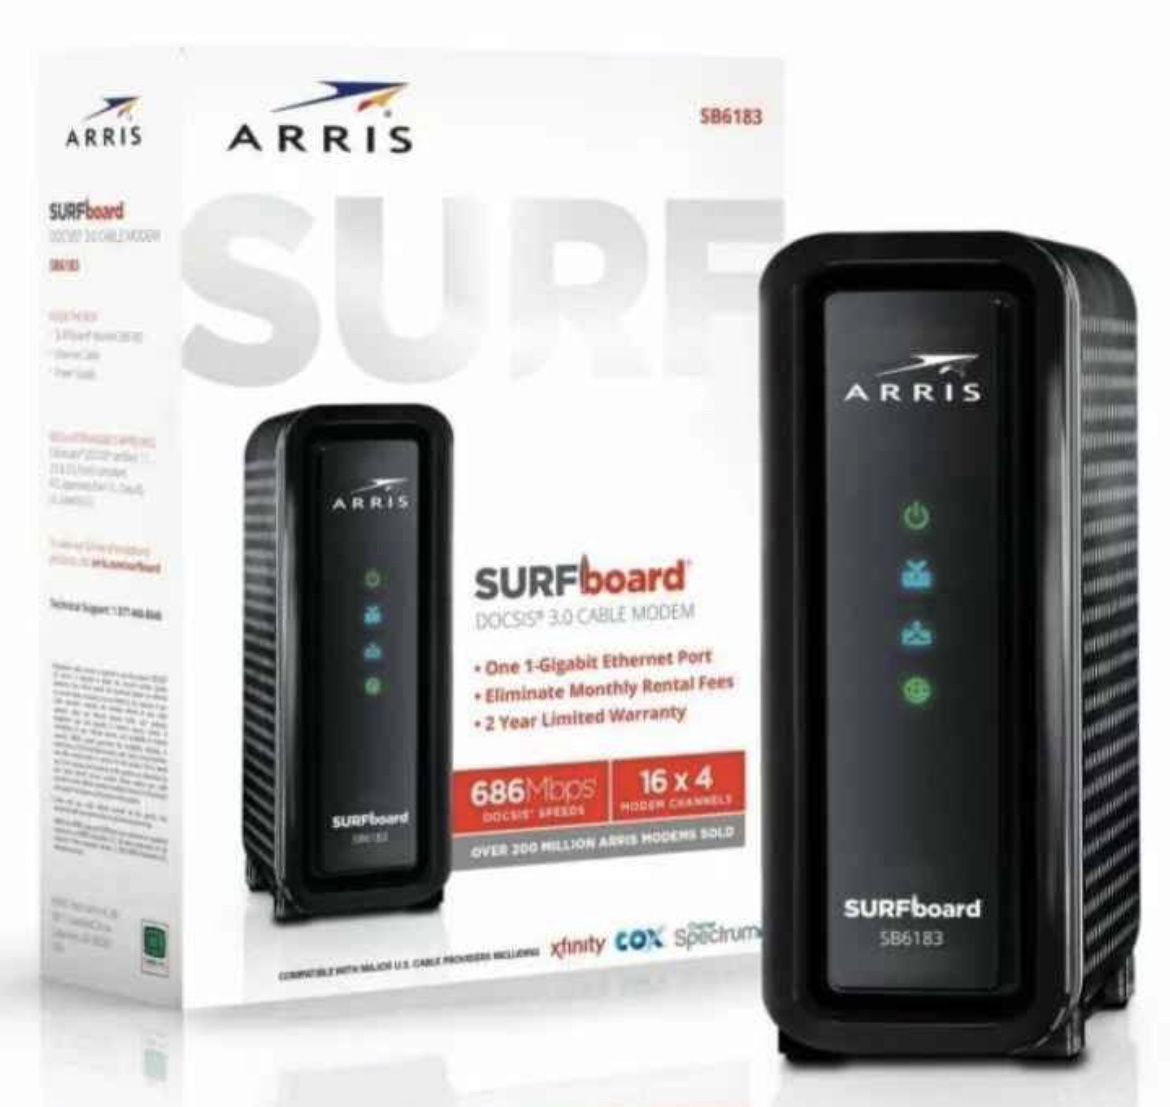 ARRIS Surfboard SBG6950AC2 Cable Modem & Wi-fi Router With McAfee